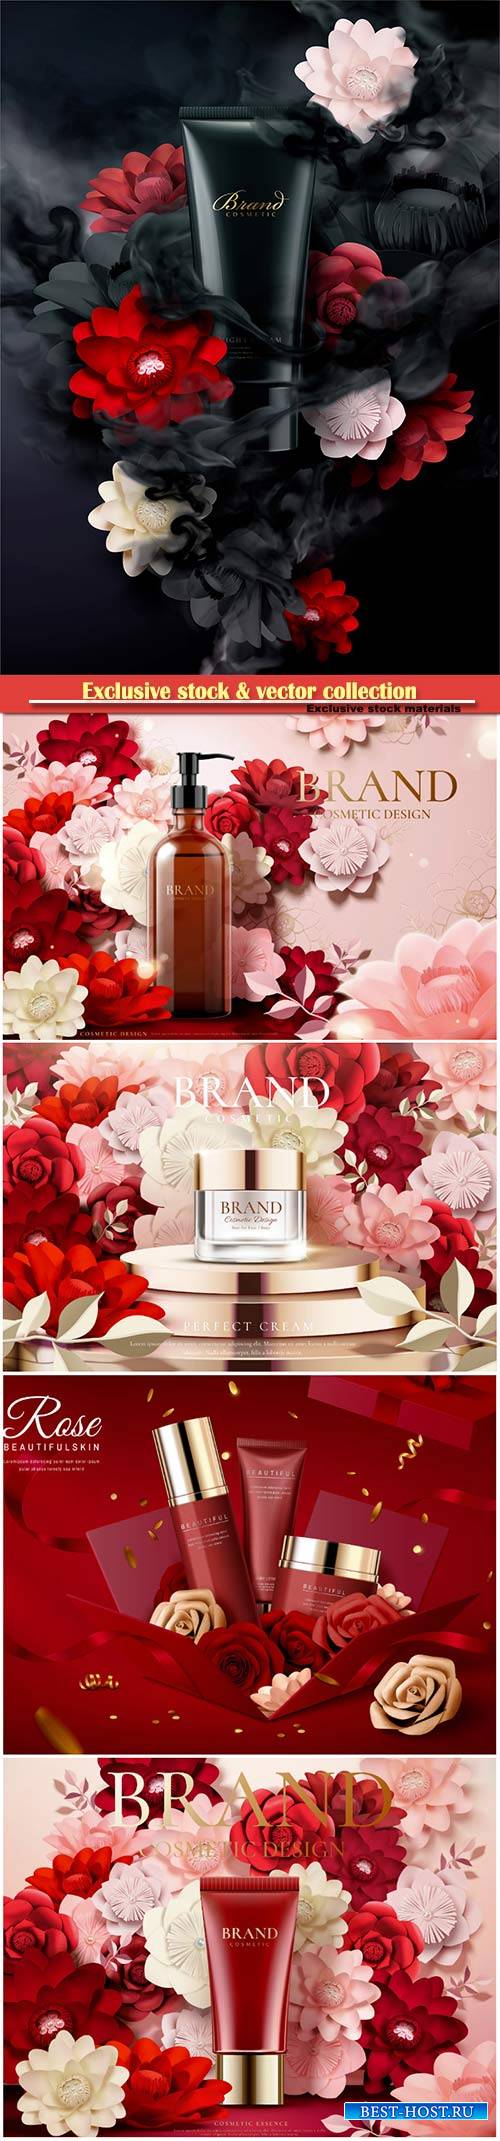 Cosmetic set ads with paper flowers in 3d illustration